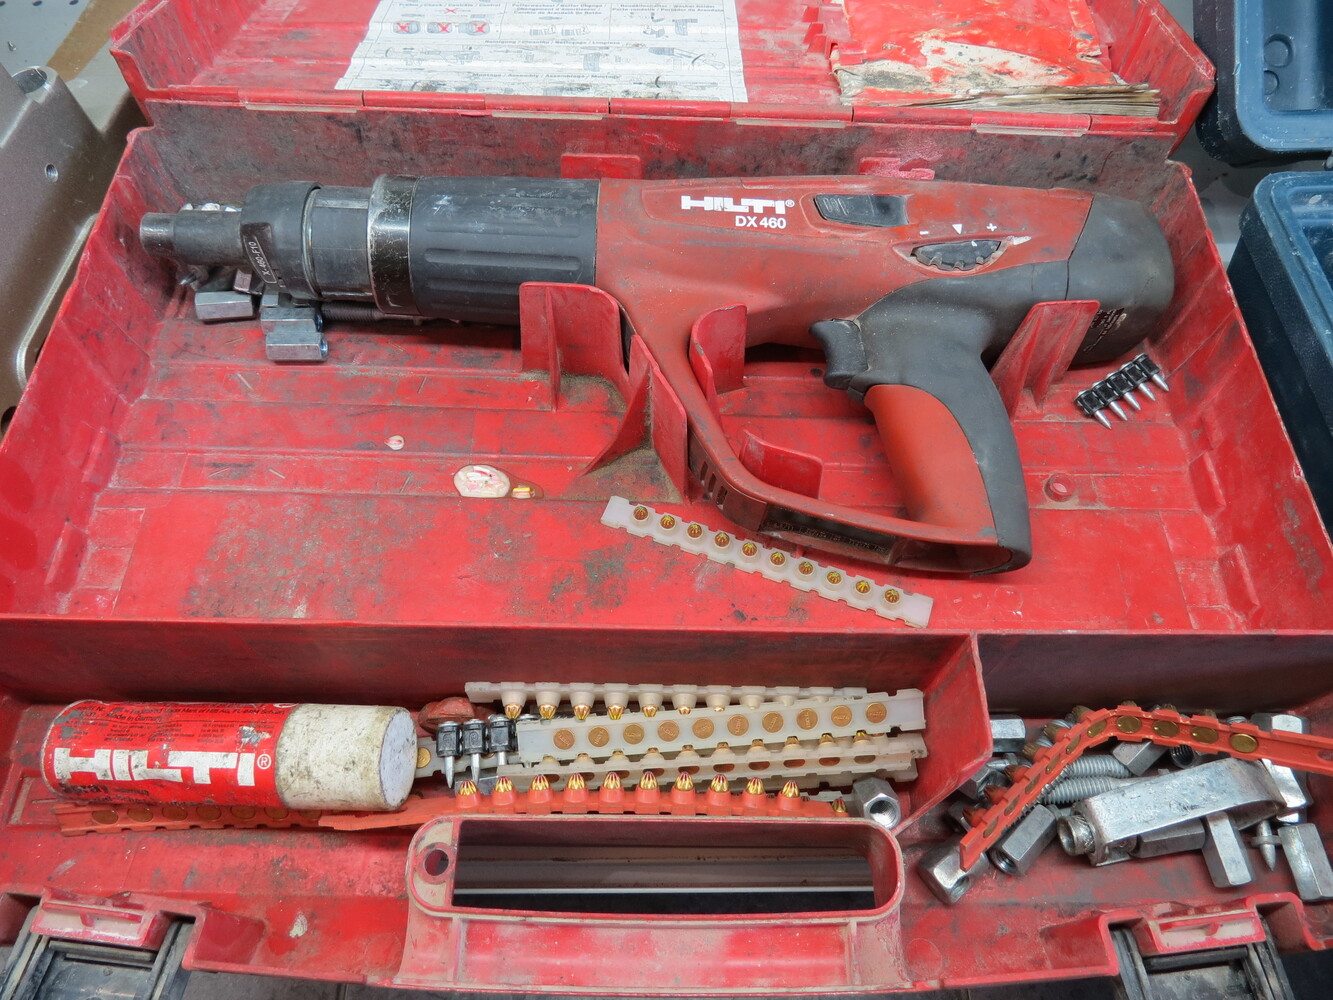 Hilti DX460 Powder Actuated Tool 